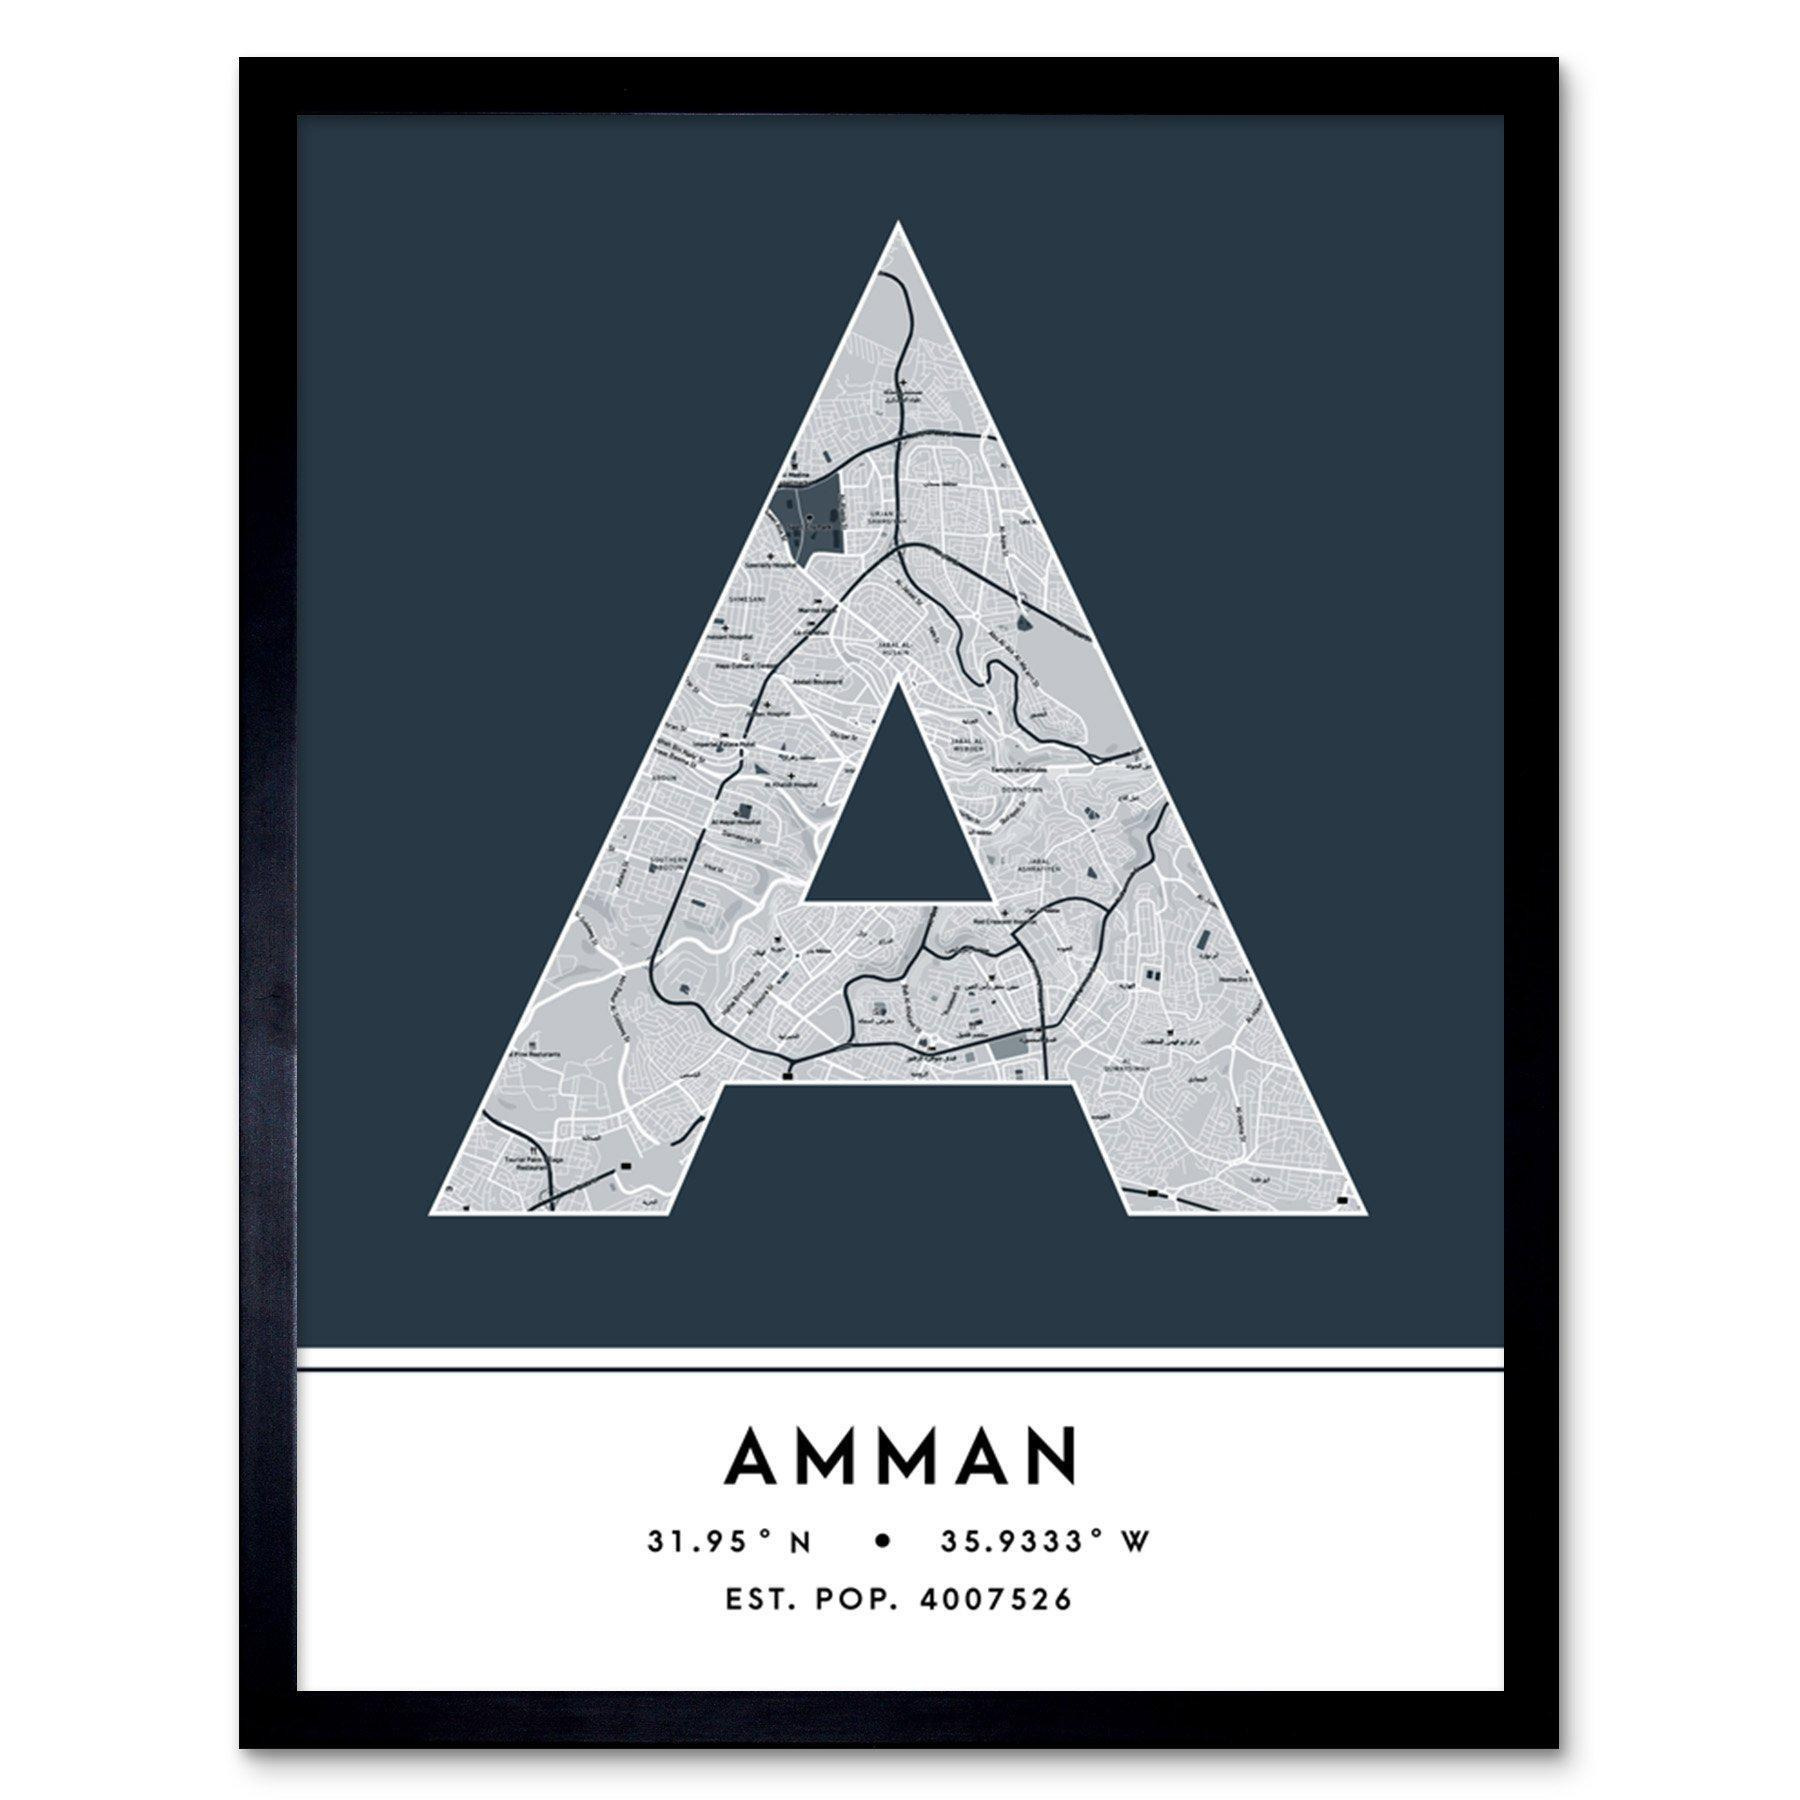 Amman Jordan City Map Modern Typography Stylish Letter Framed Word Wall Art Print Poster for Home Décor - image 1